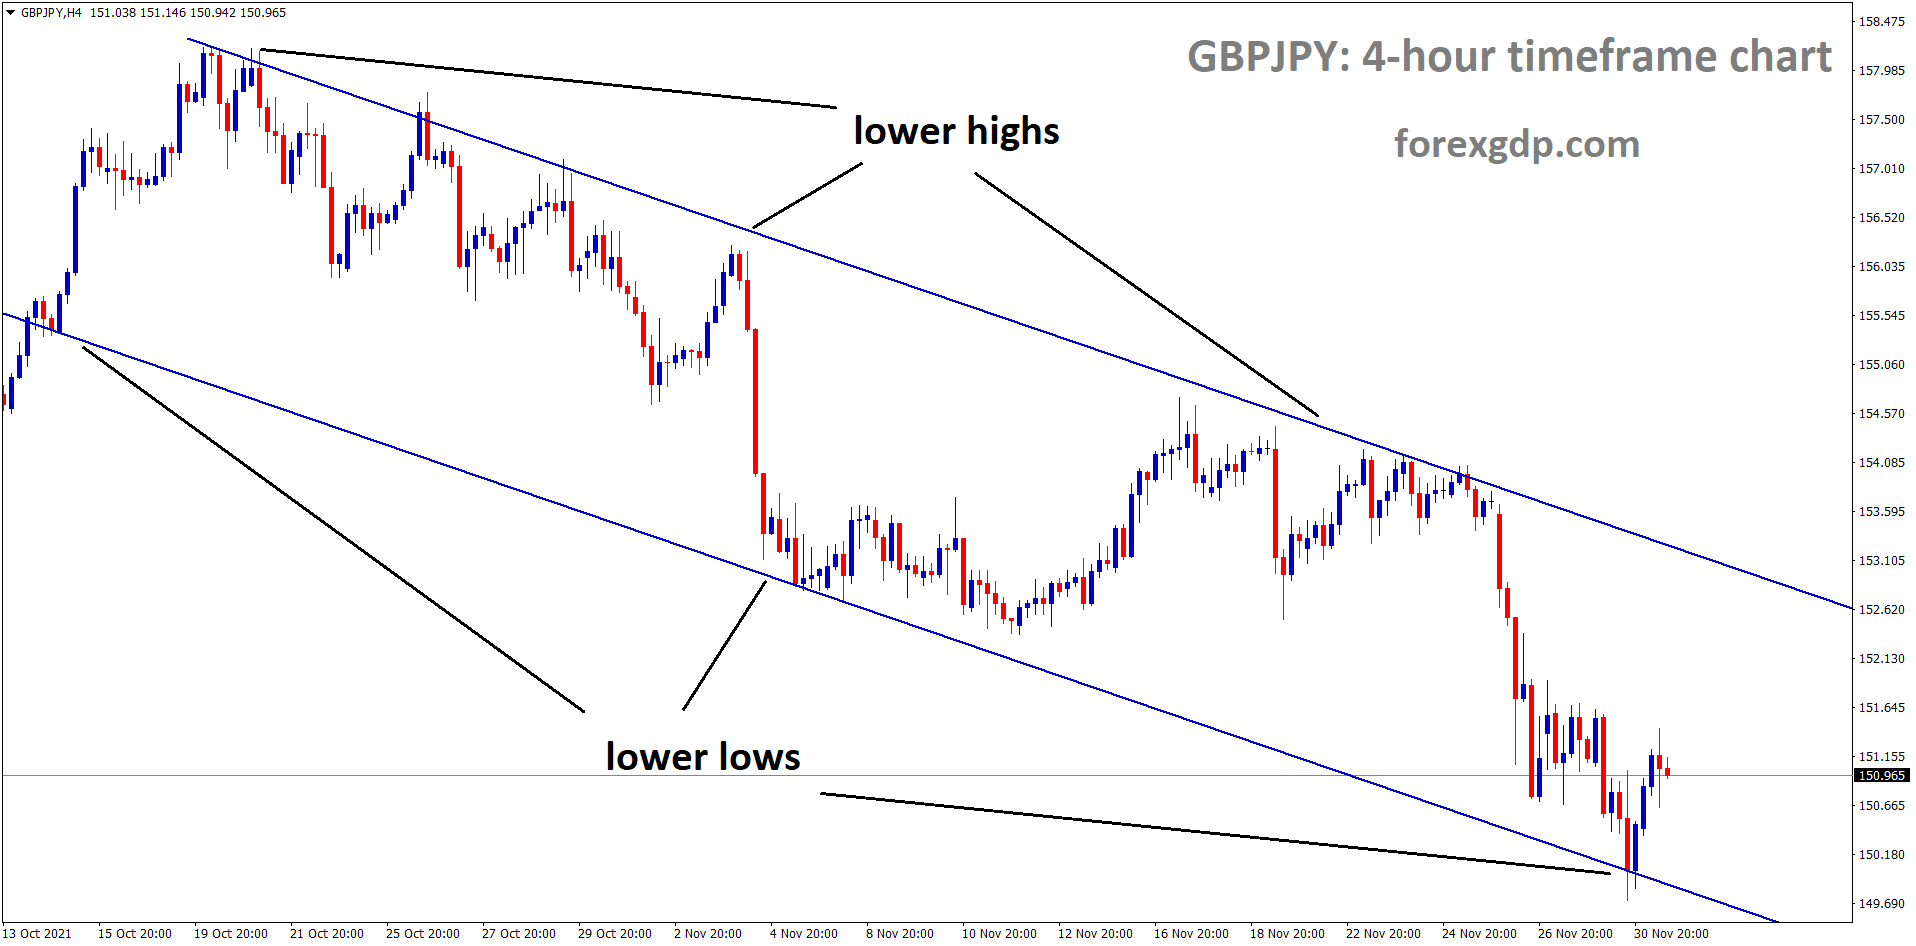 GBPJPY is moving in the Descending channel and the market has rebounded and doing corrections from the lower low area of the channel. 1